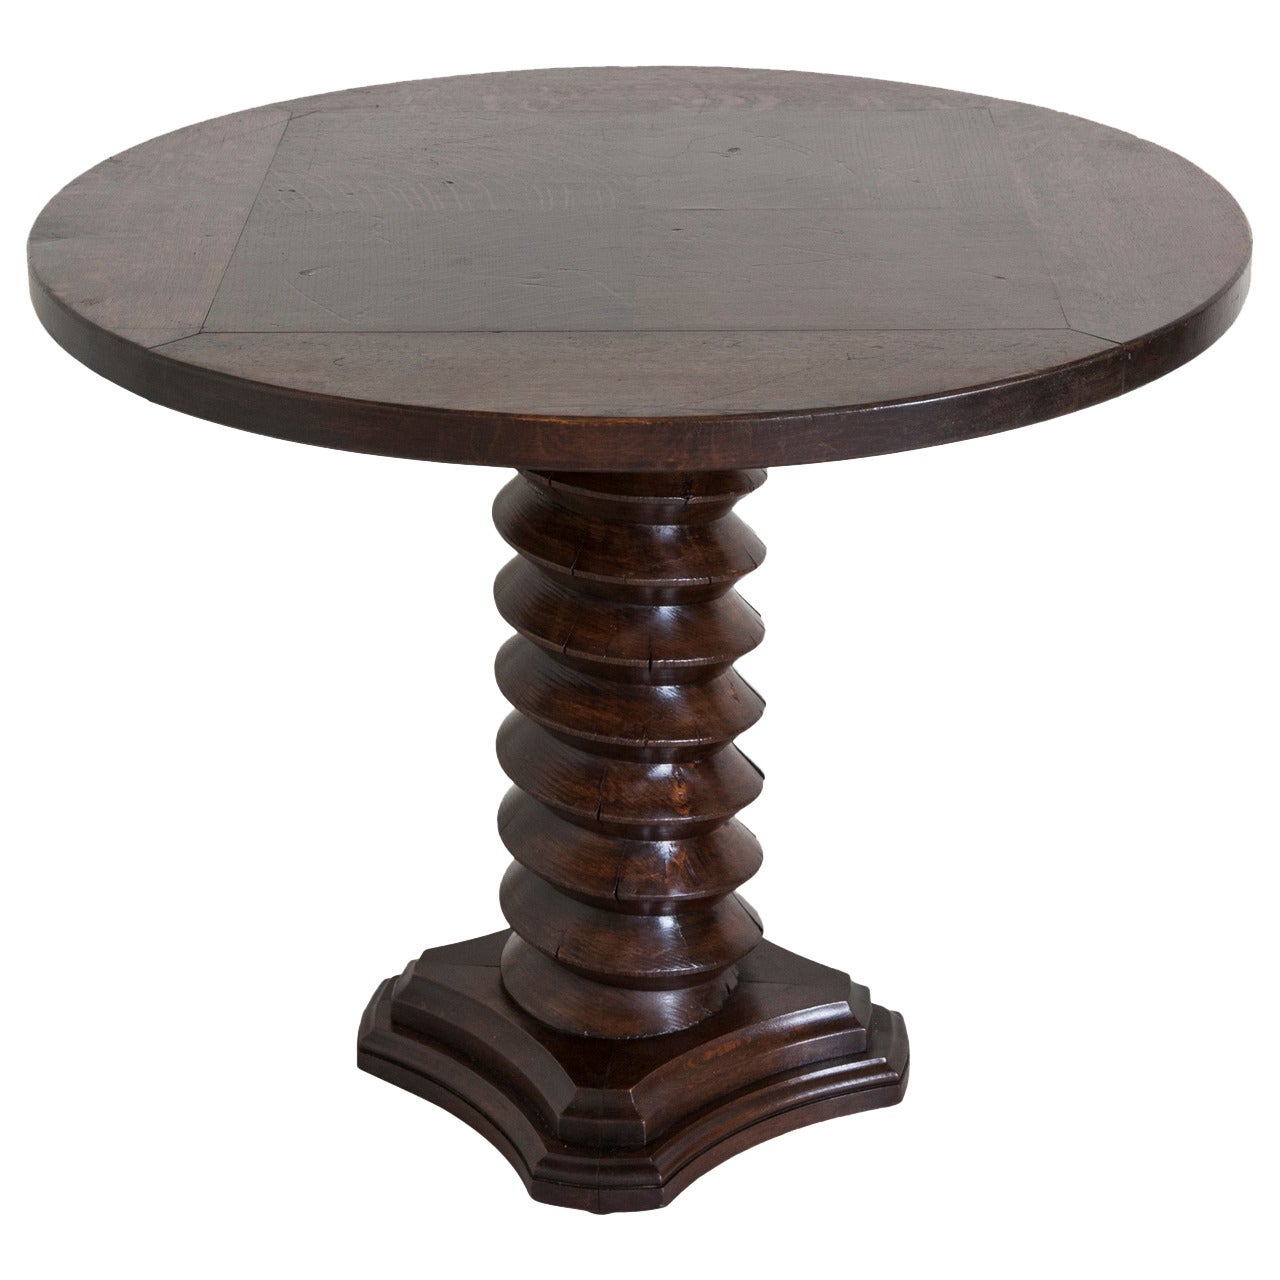 19th Century French Pedestal Table Made from Solid Oak Apple Press Screw